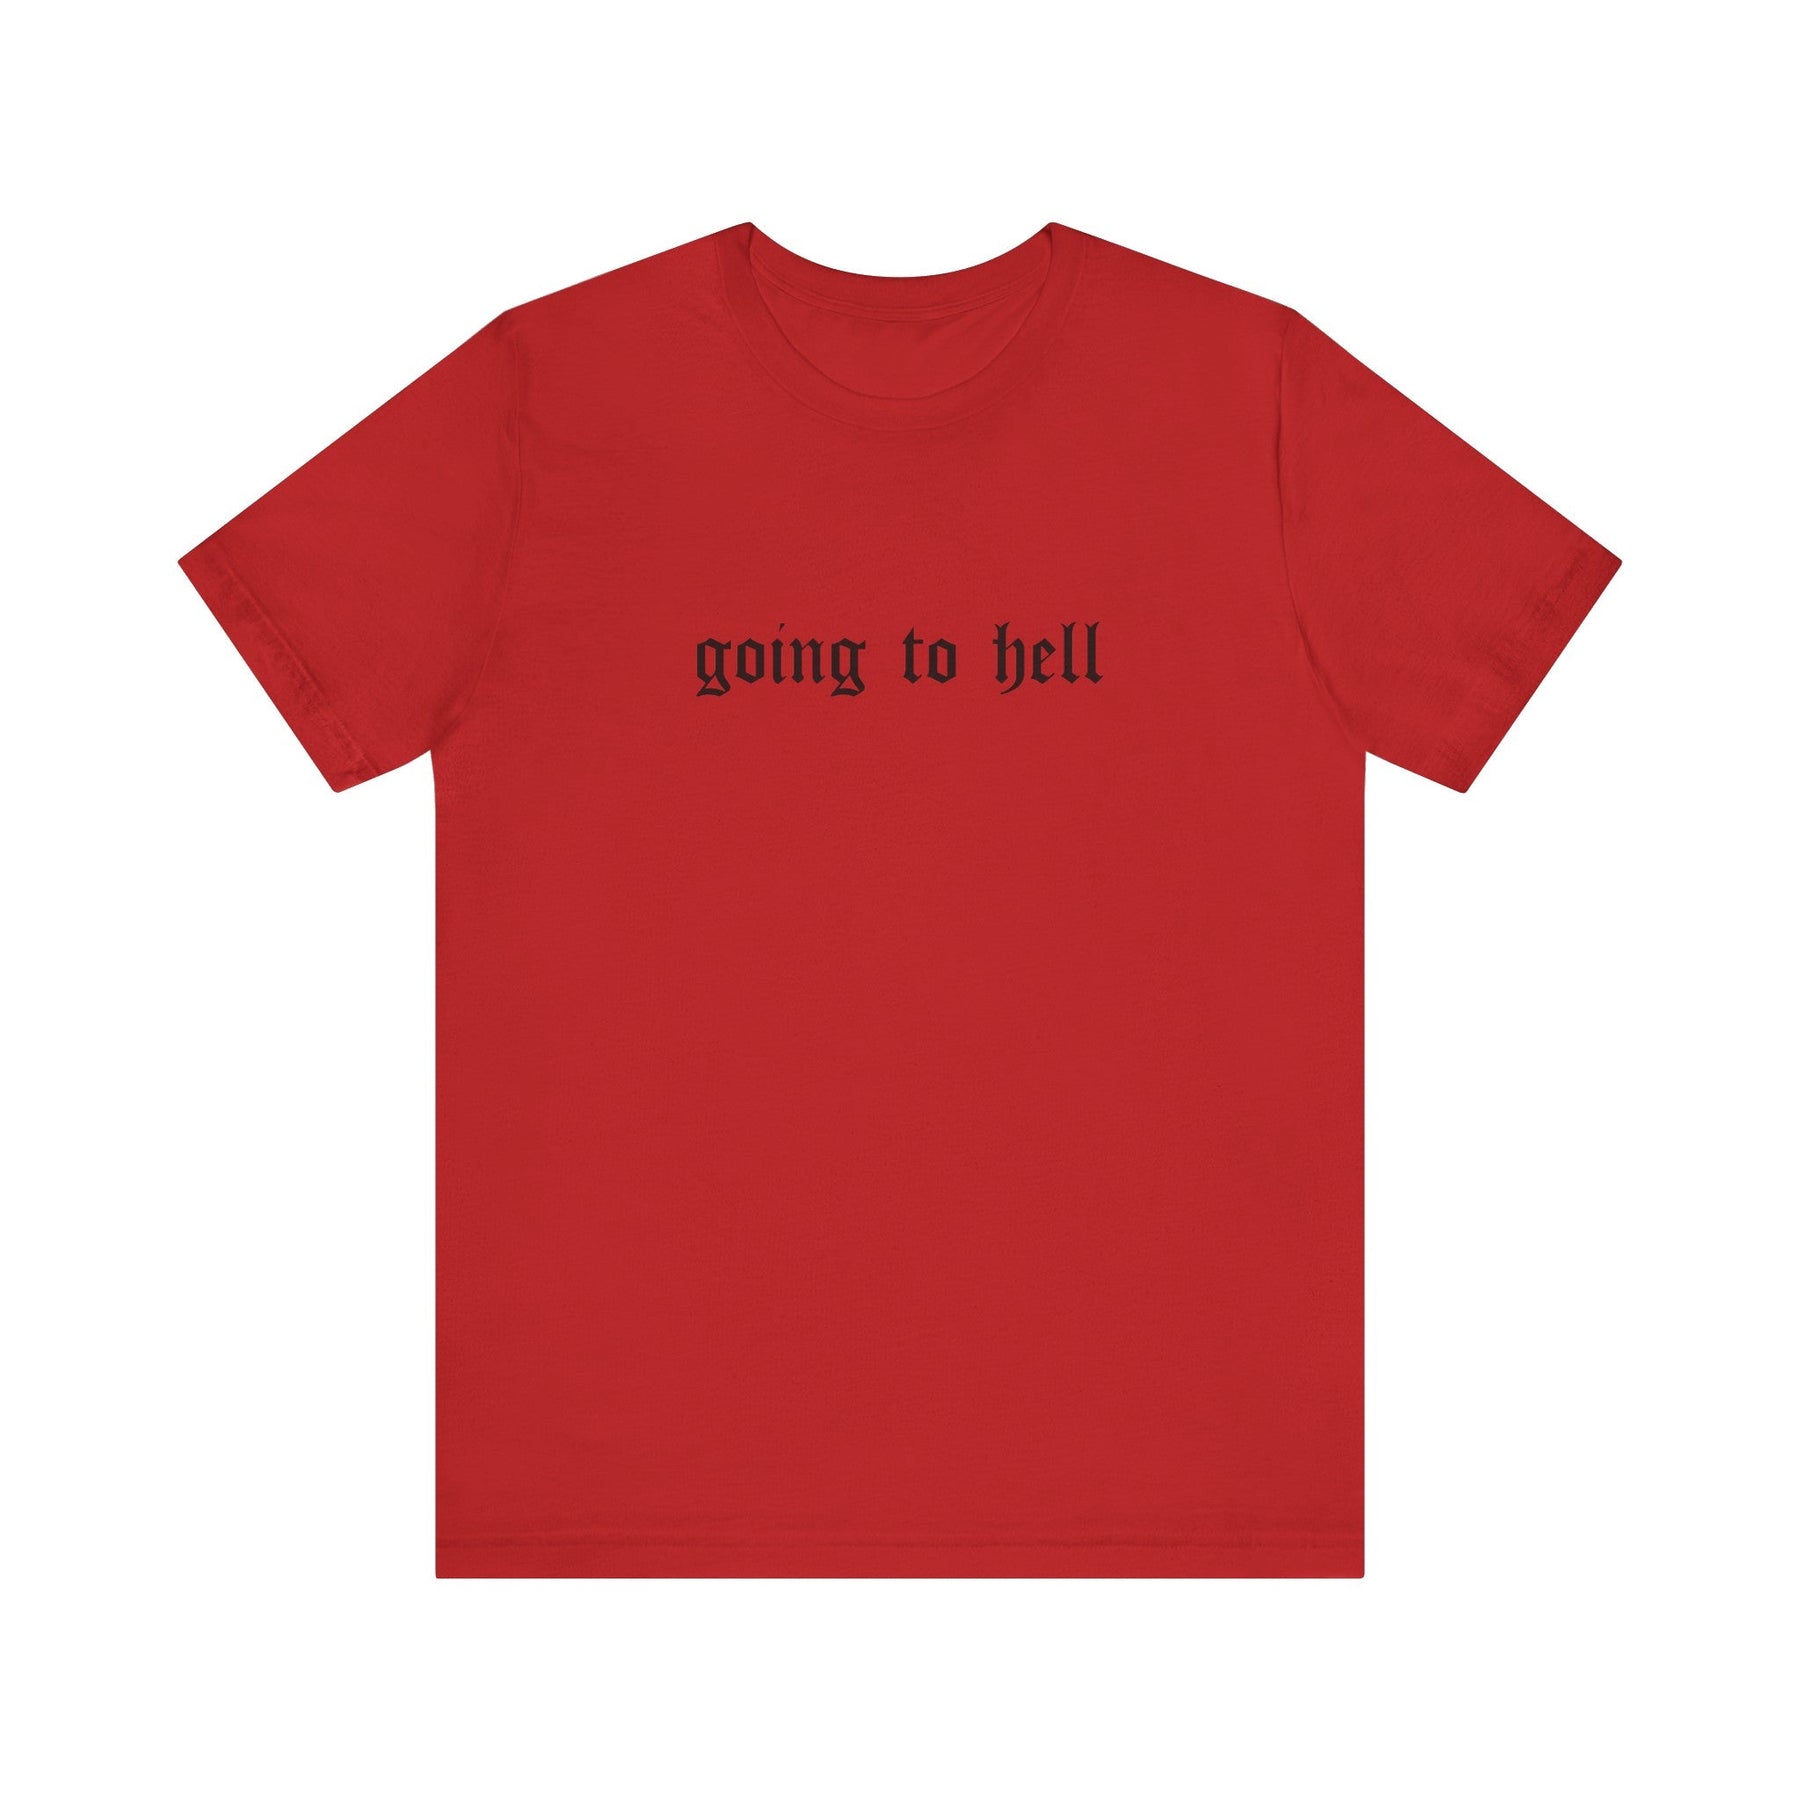 Going to Hell Gothic T - Shirt - Goth Cloth Co.T - Shirt12645957372194509631